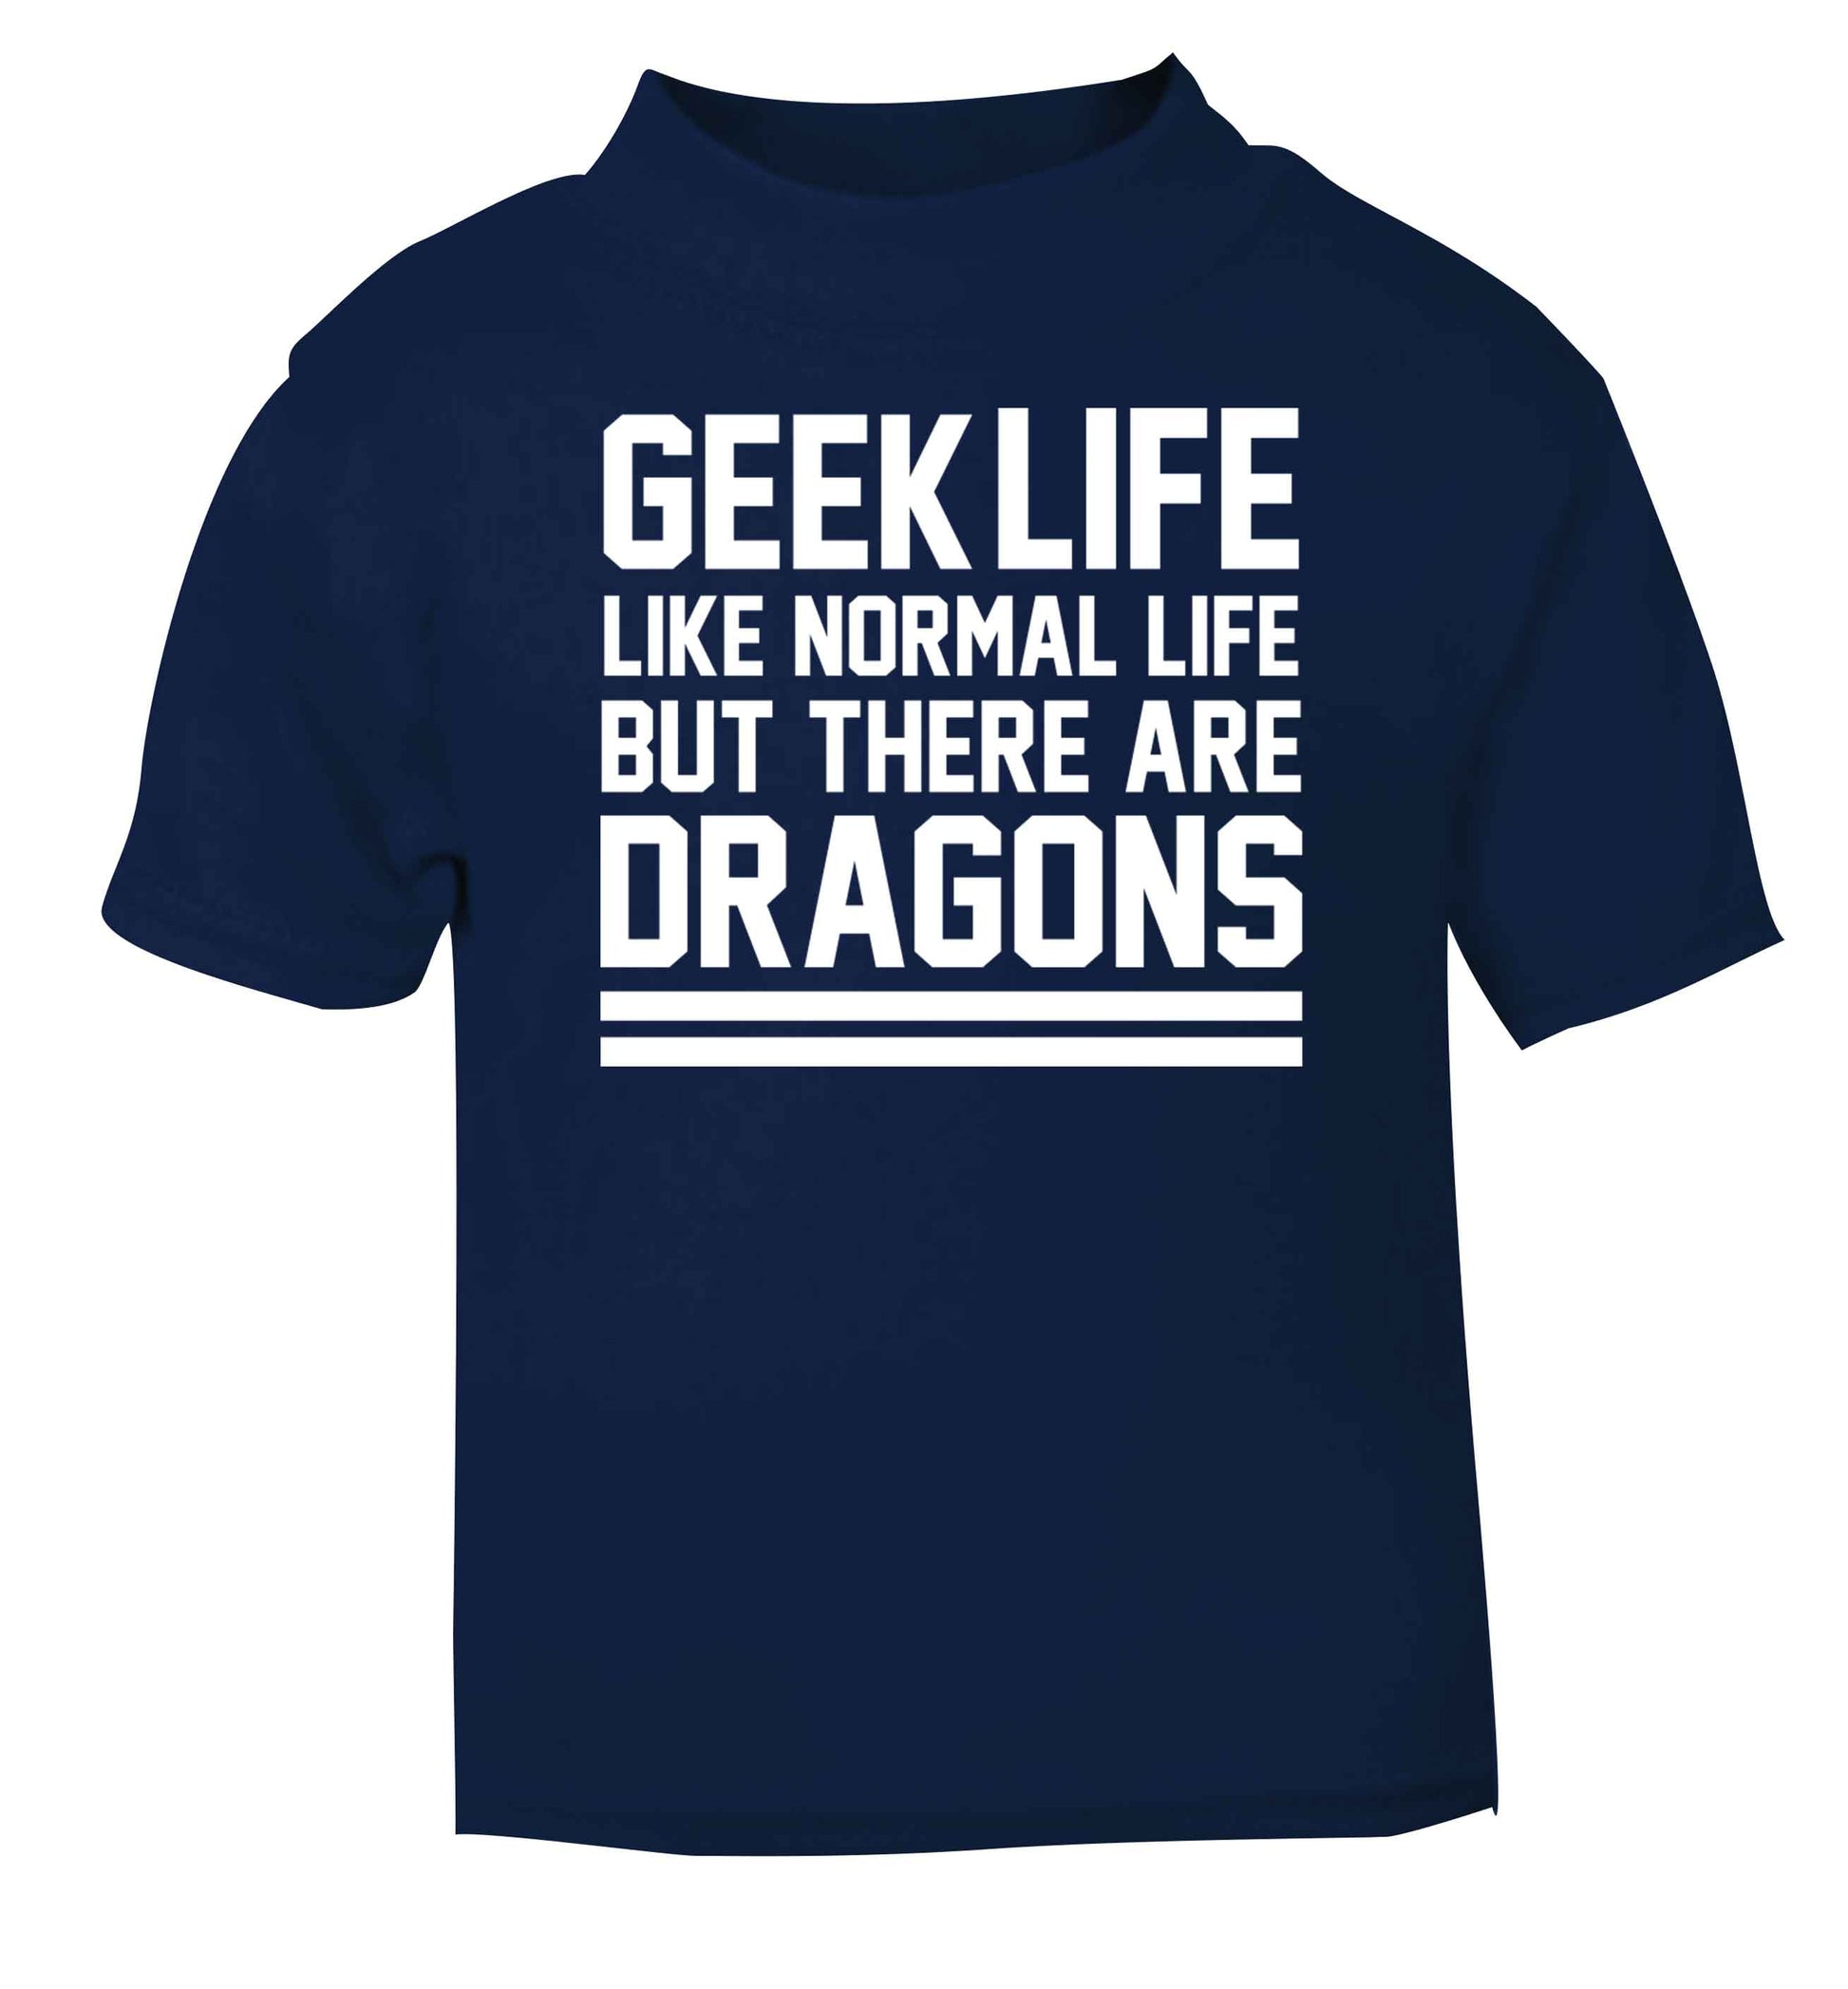 Geek life like normal life but there are dragons navy baby toddler Tshirt 2 Years